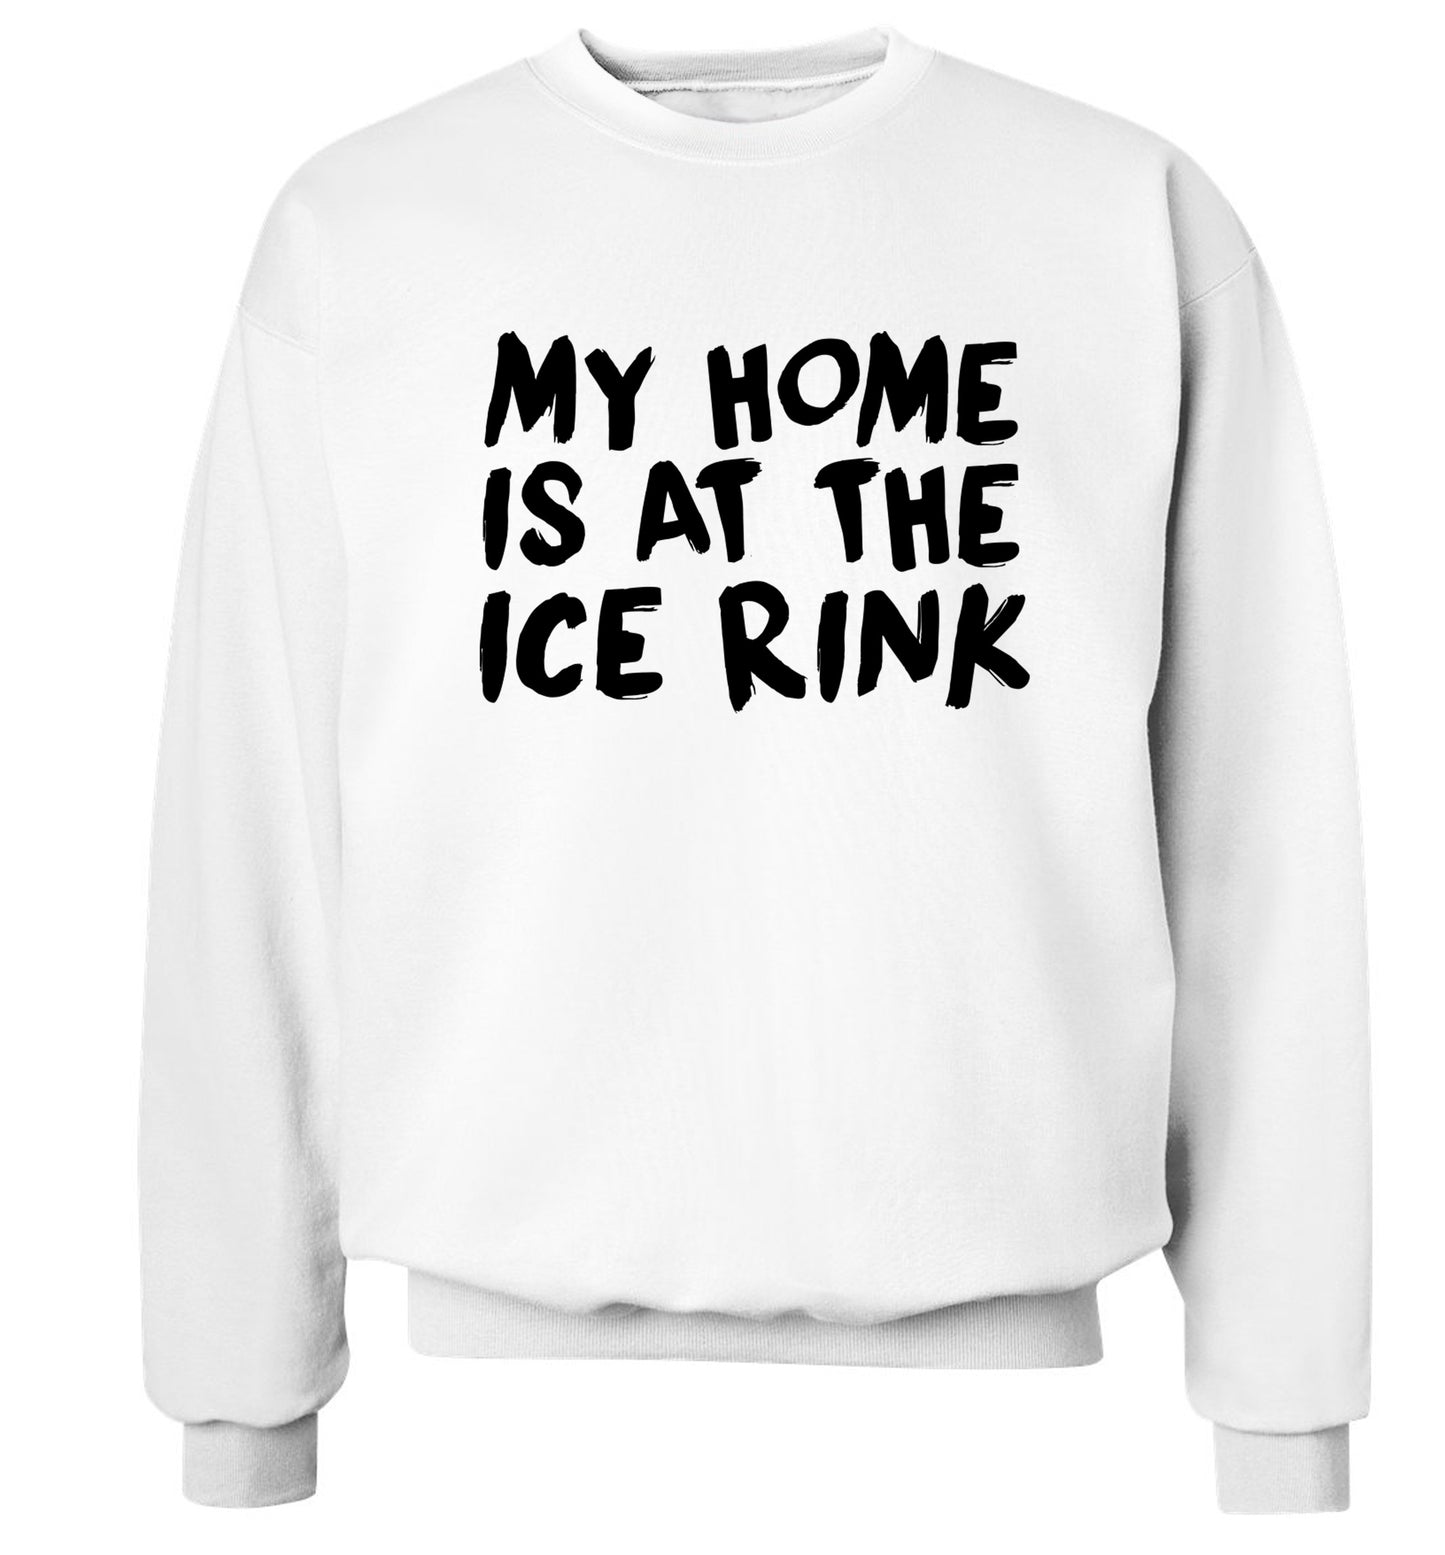 My home is at the ice rink Adult's unisex white Sweater 2XL